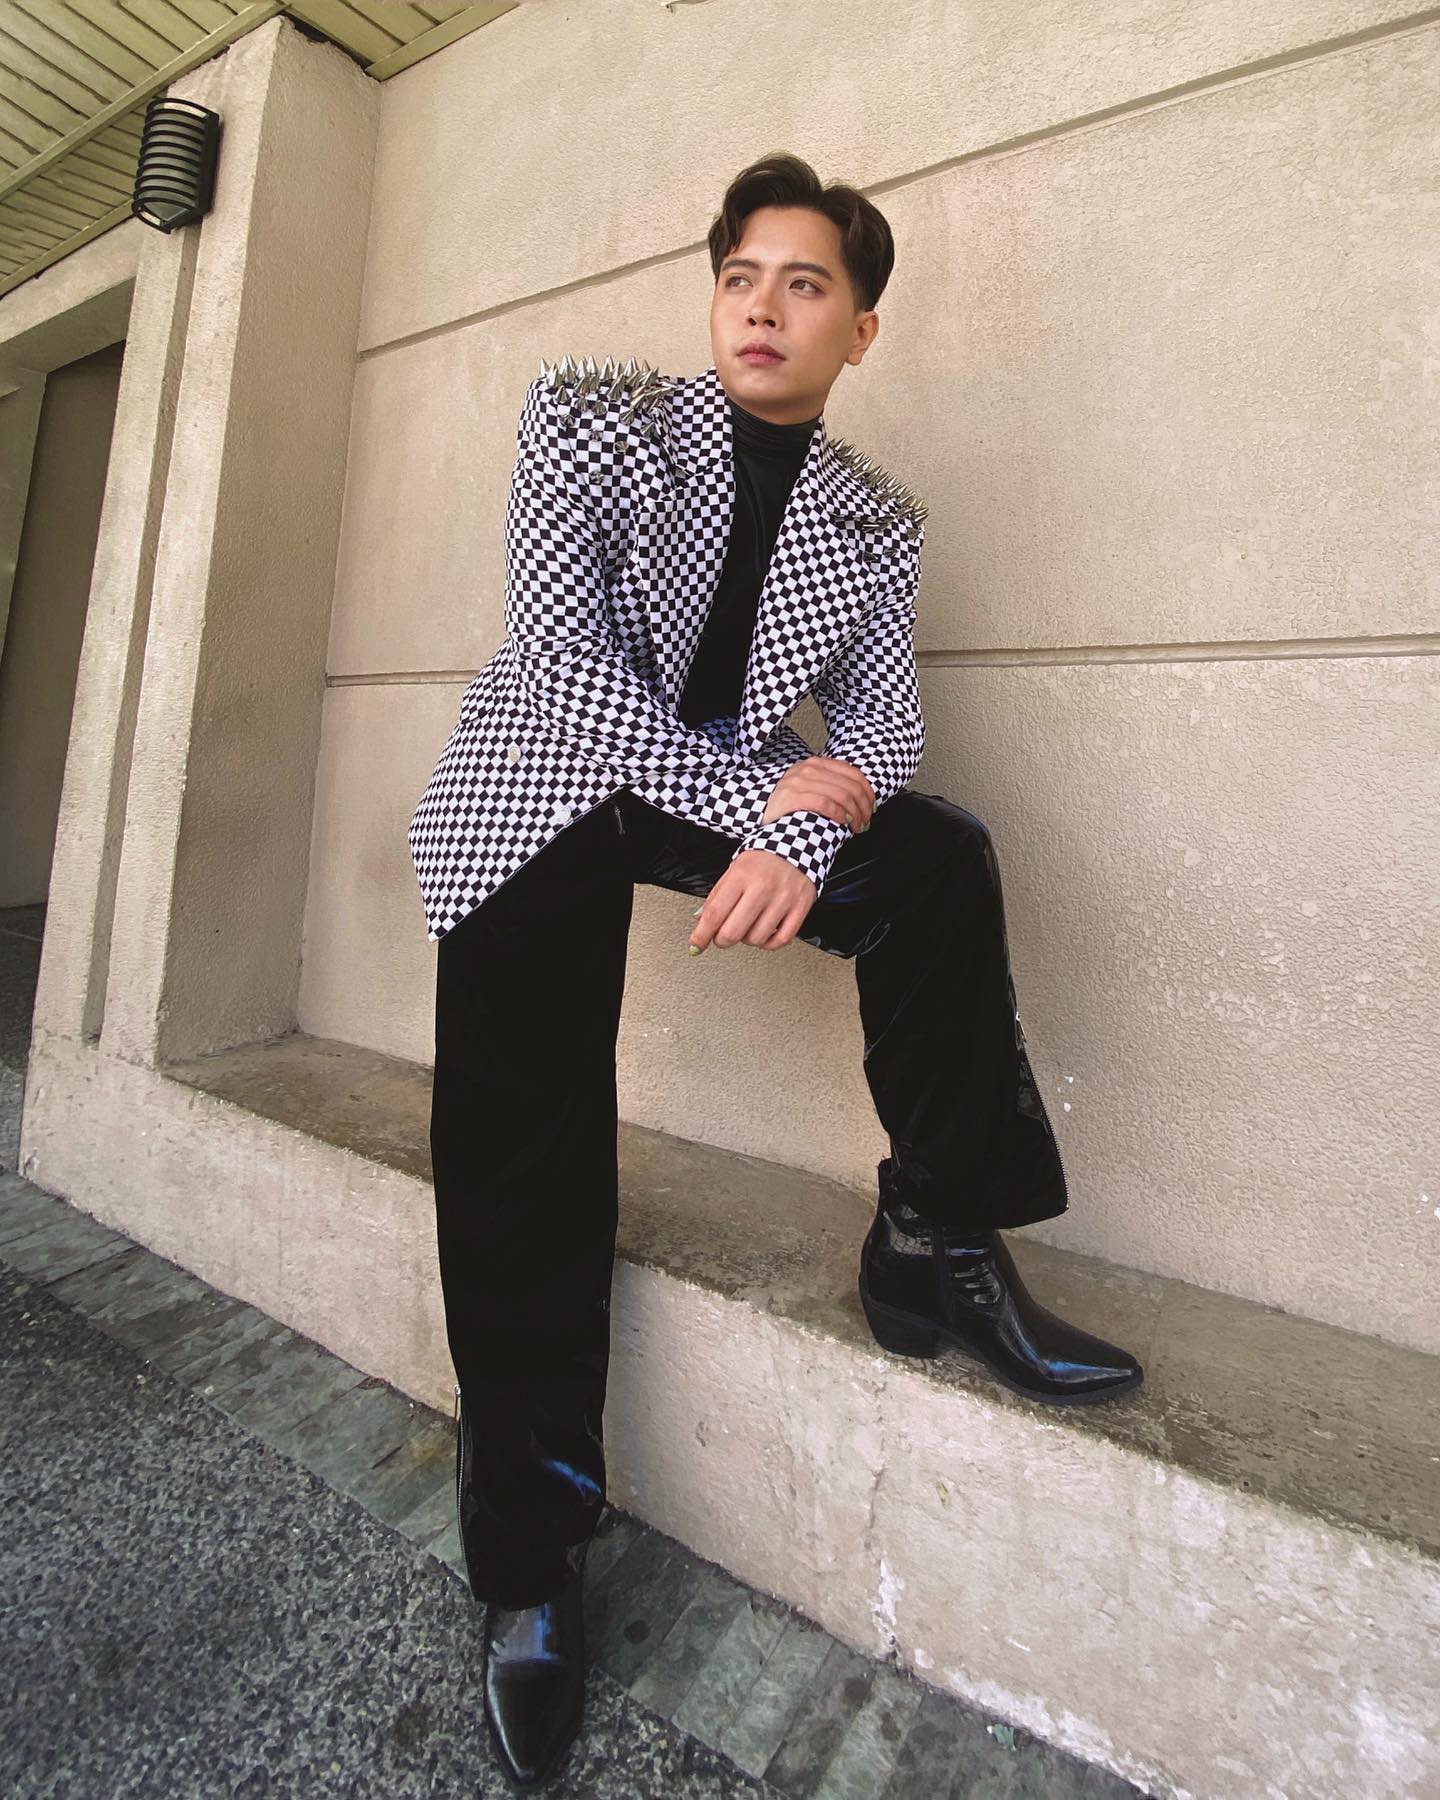 LOOK: Jason Dy's Outfiits Made by Local Designers | Preview.ph